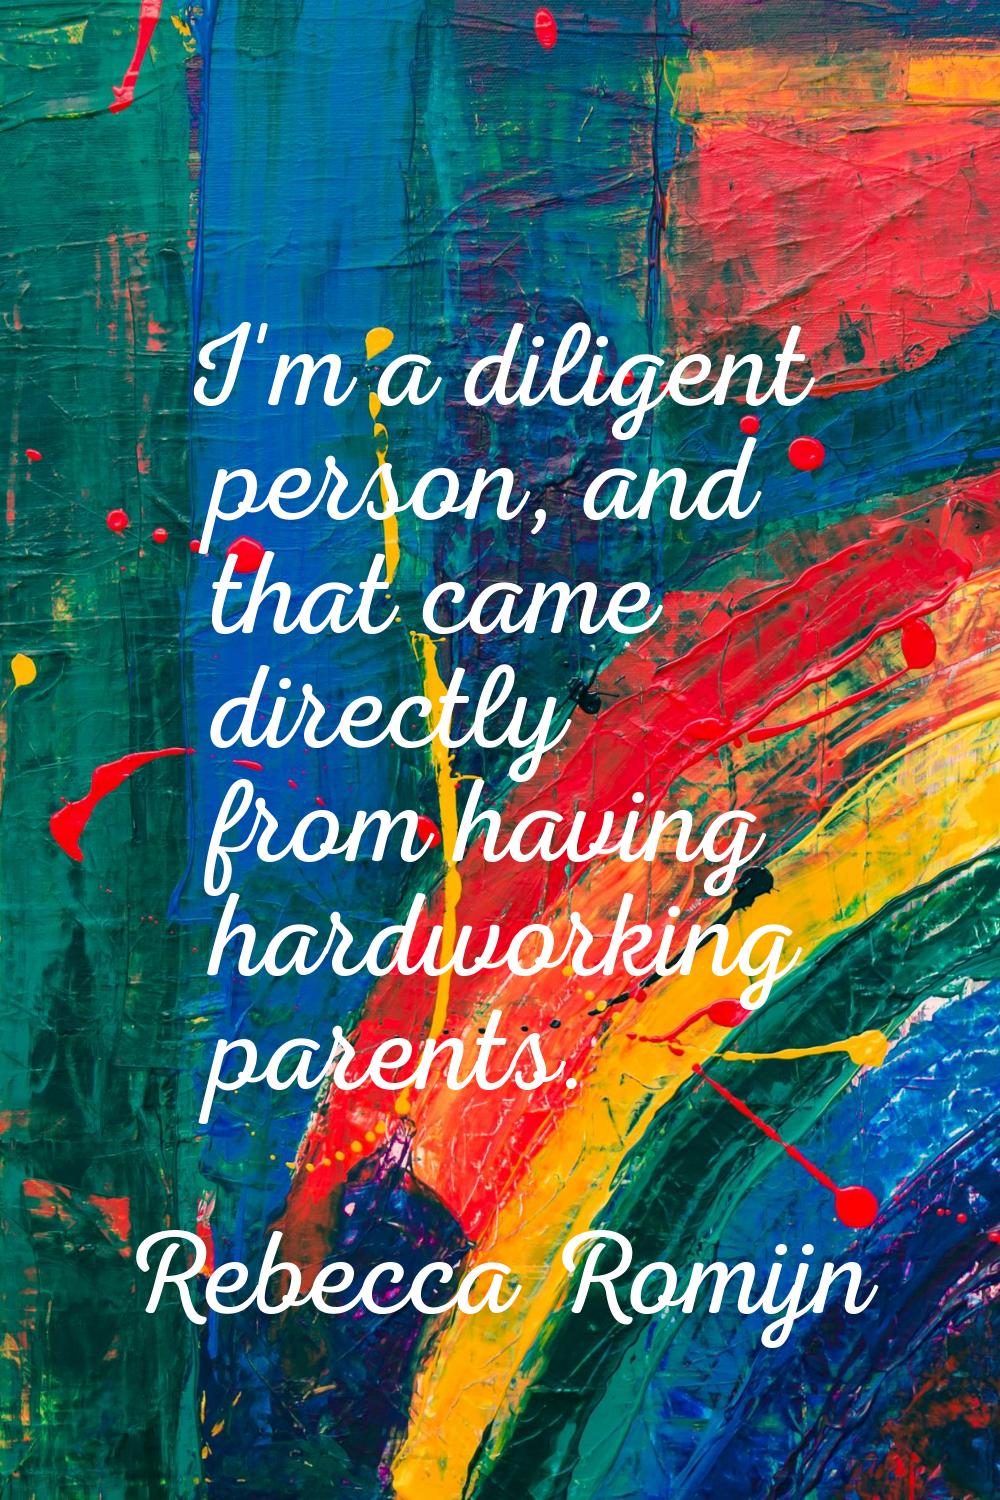 I'm a diligent person, and that came directly from having hardworking parents.